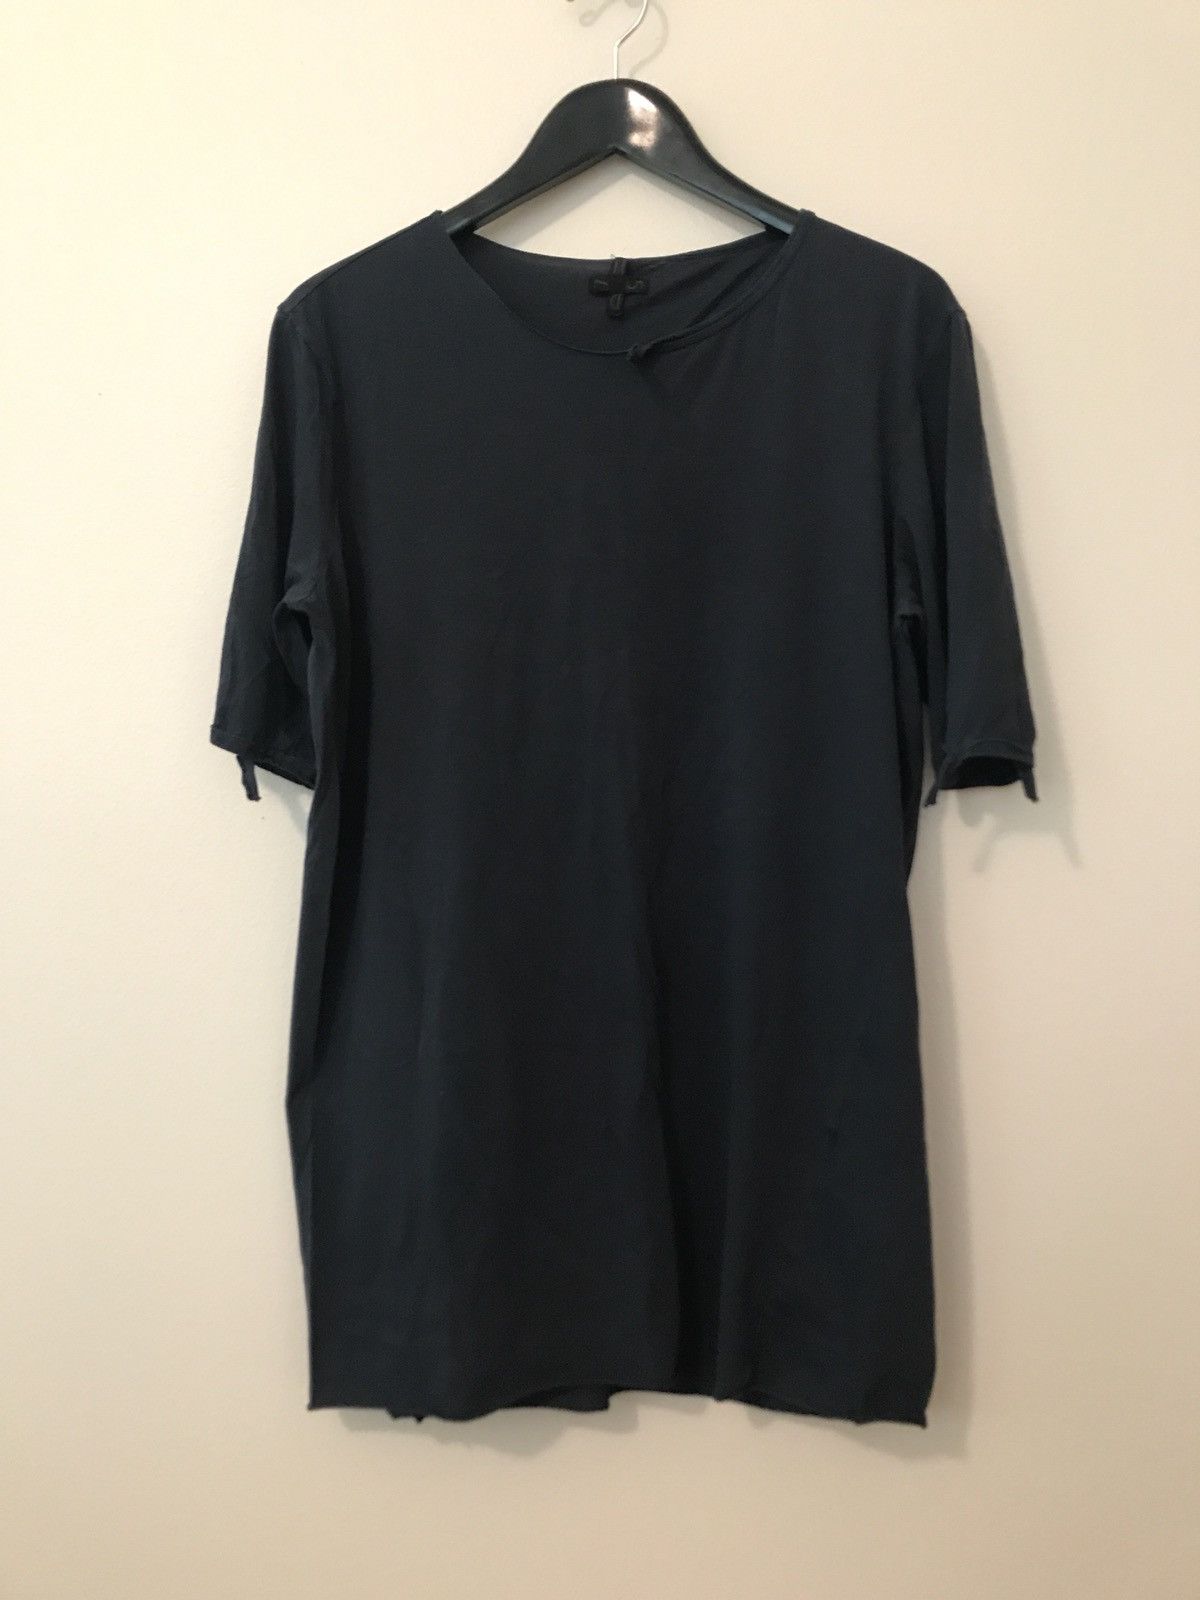 Md75 Md75 Blue Tee | Grailed